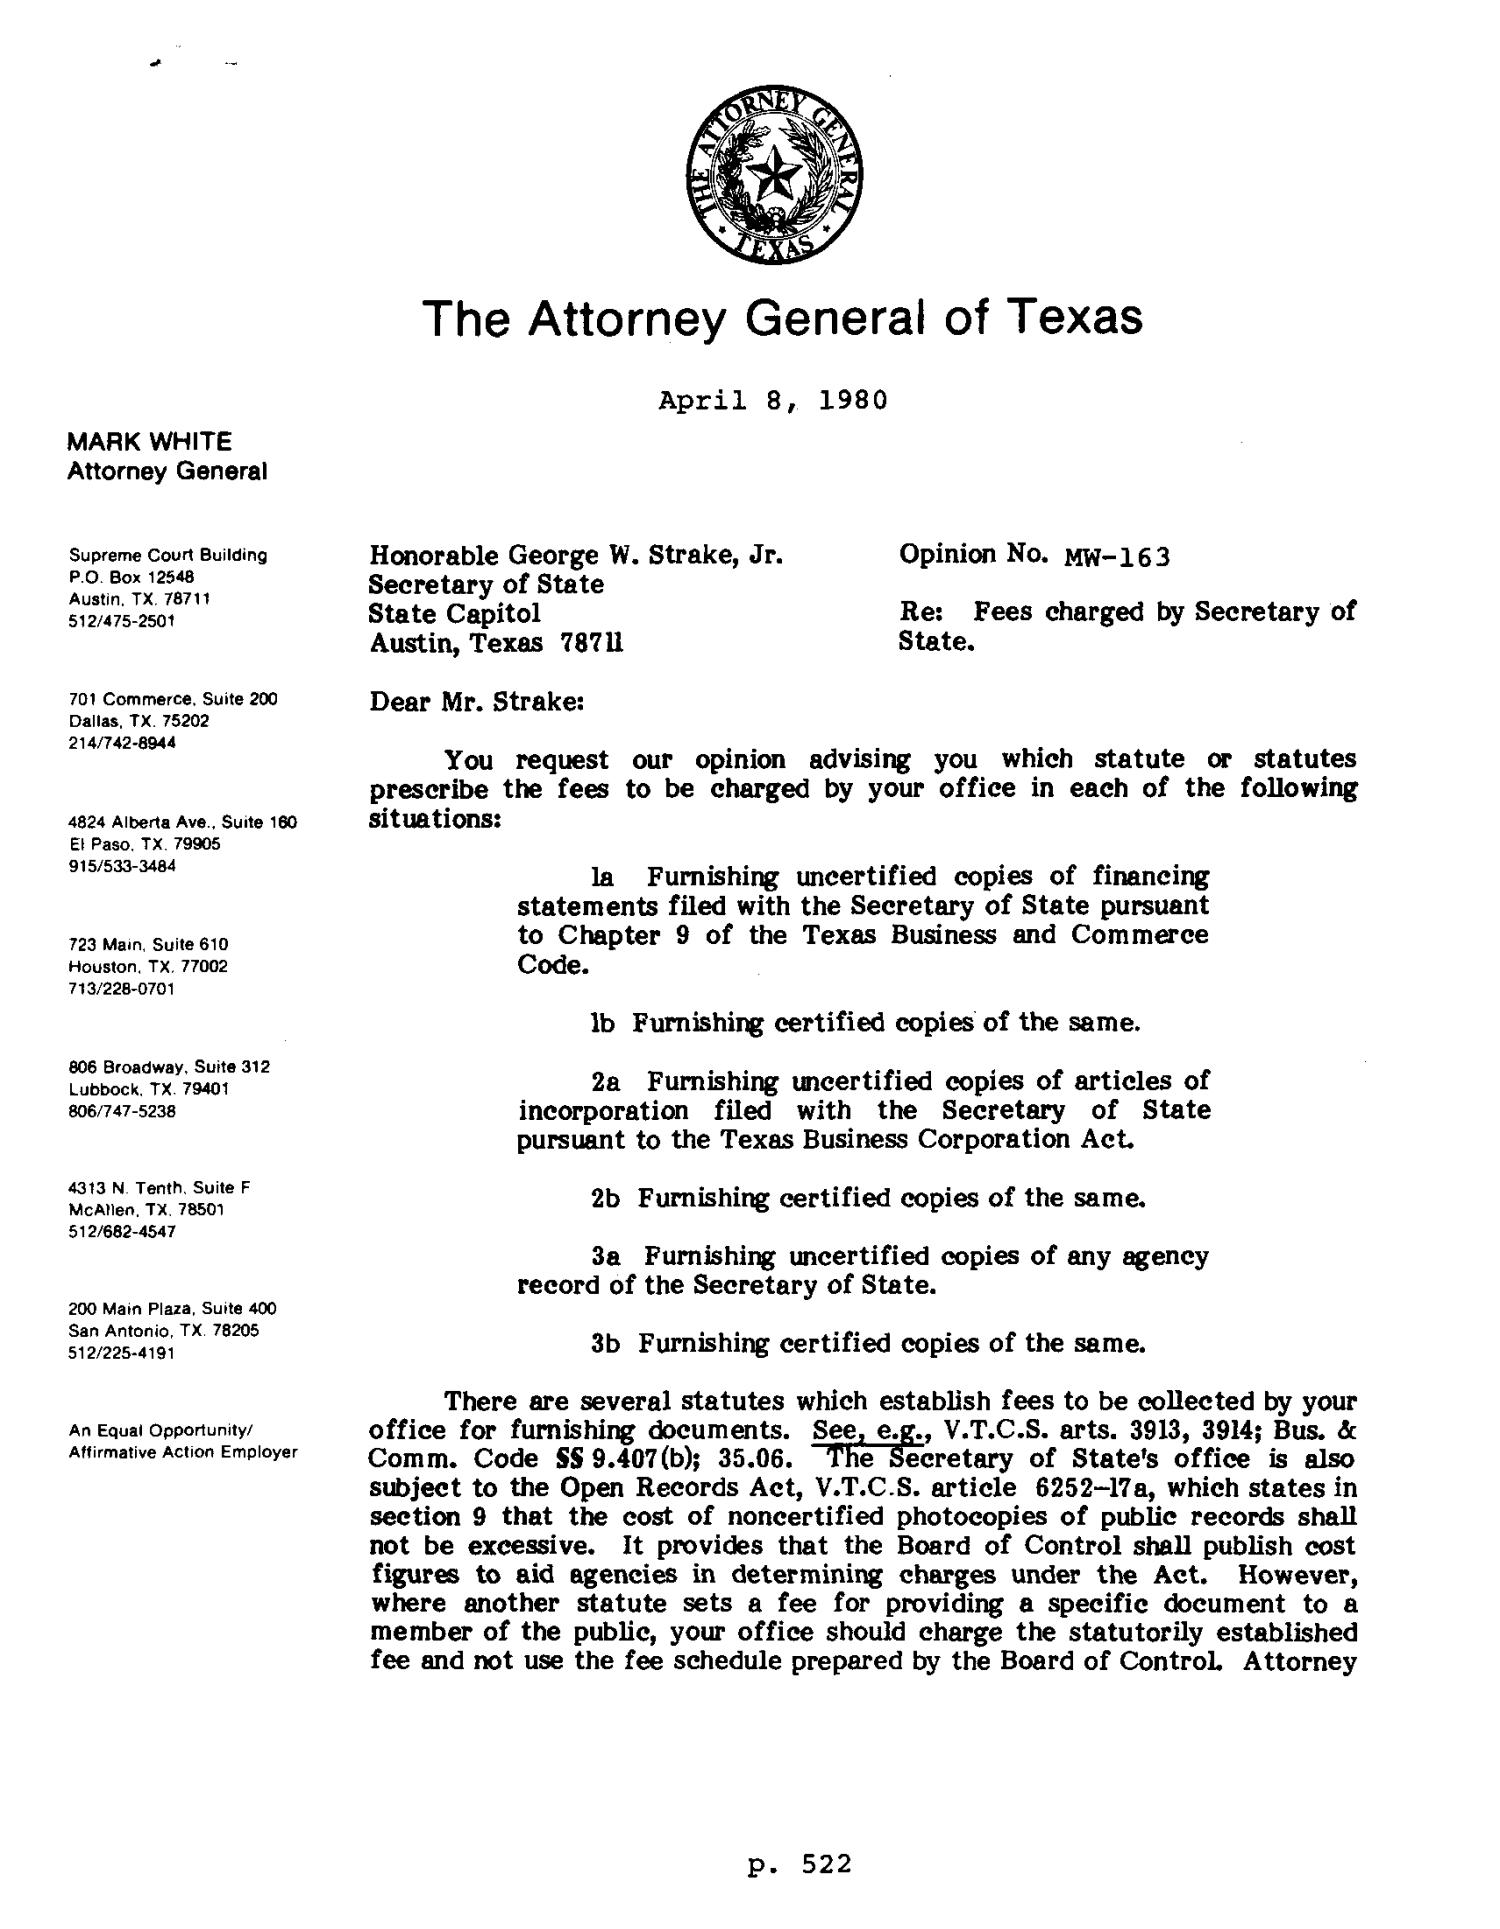 Texas Attorney General Opinion: MW-163
                                                
                                                    [Sequence #]: 1 of 3
                                                